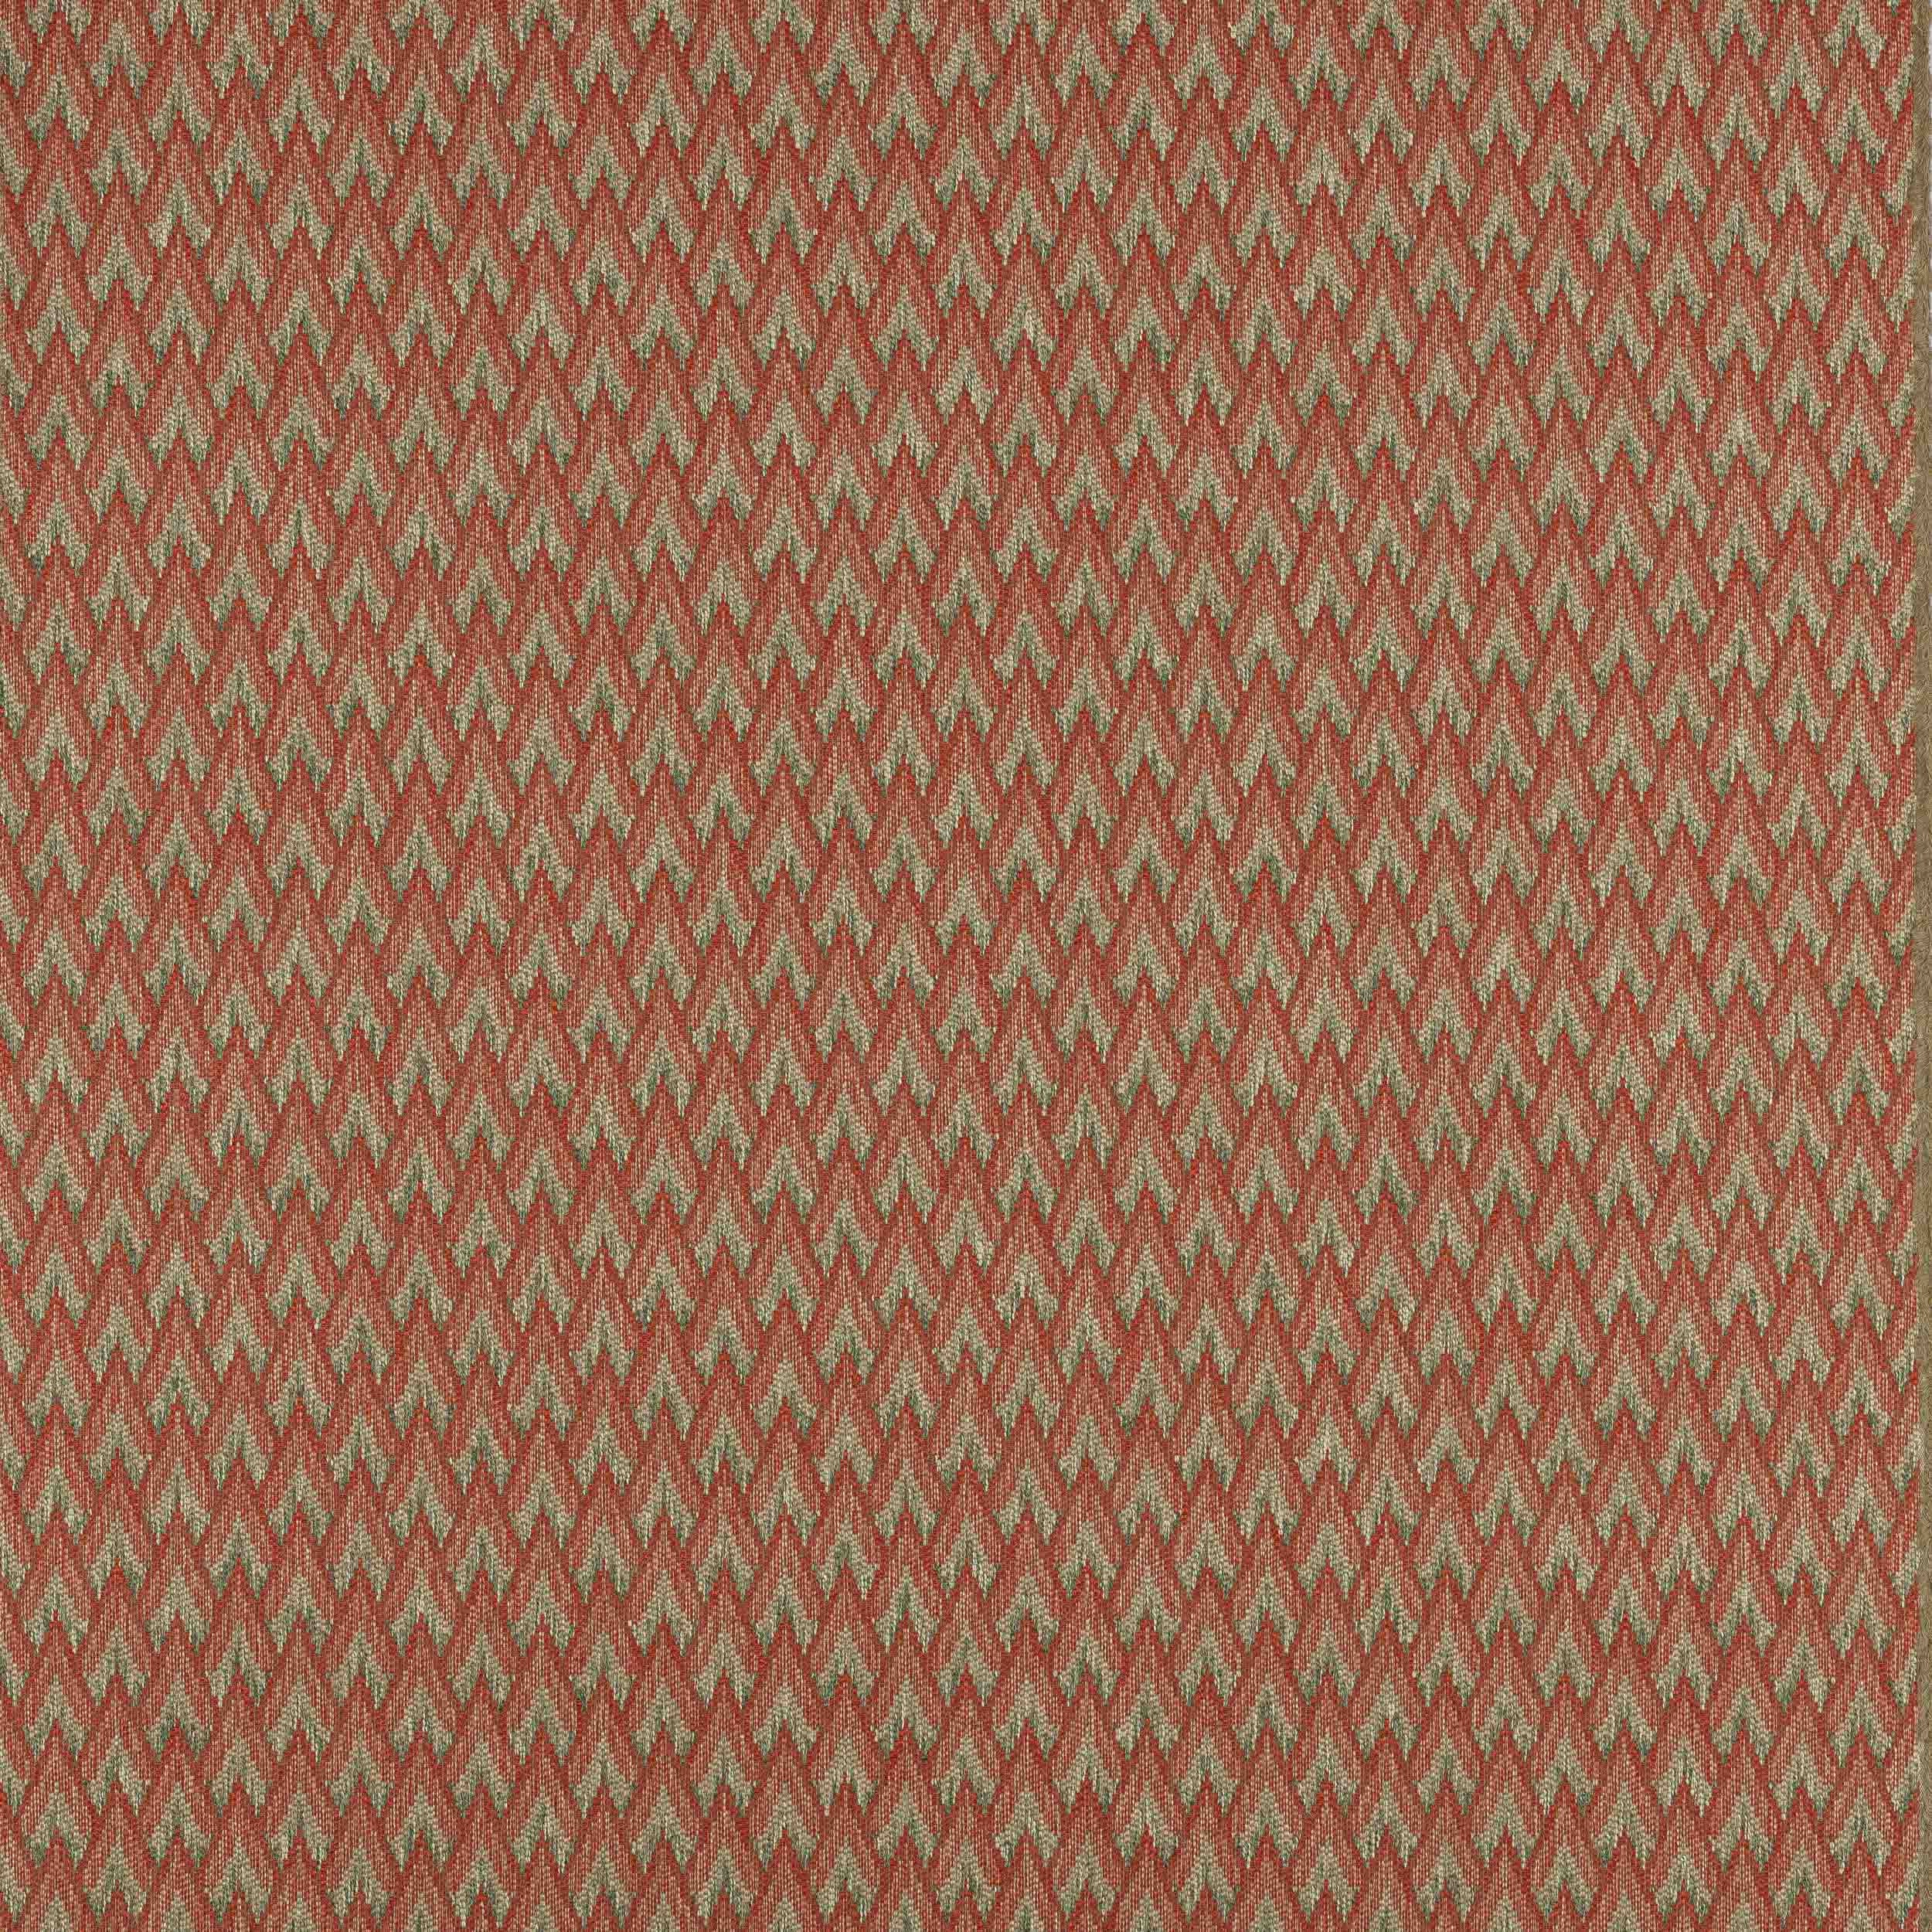 Stitch & Sparkle Cotton 44 Zigzag Ink Color Sewing Fabric by The Yard  (G040303)